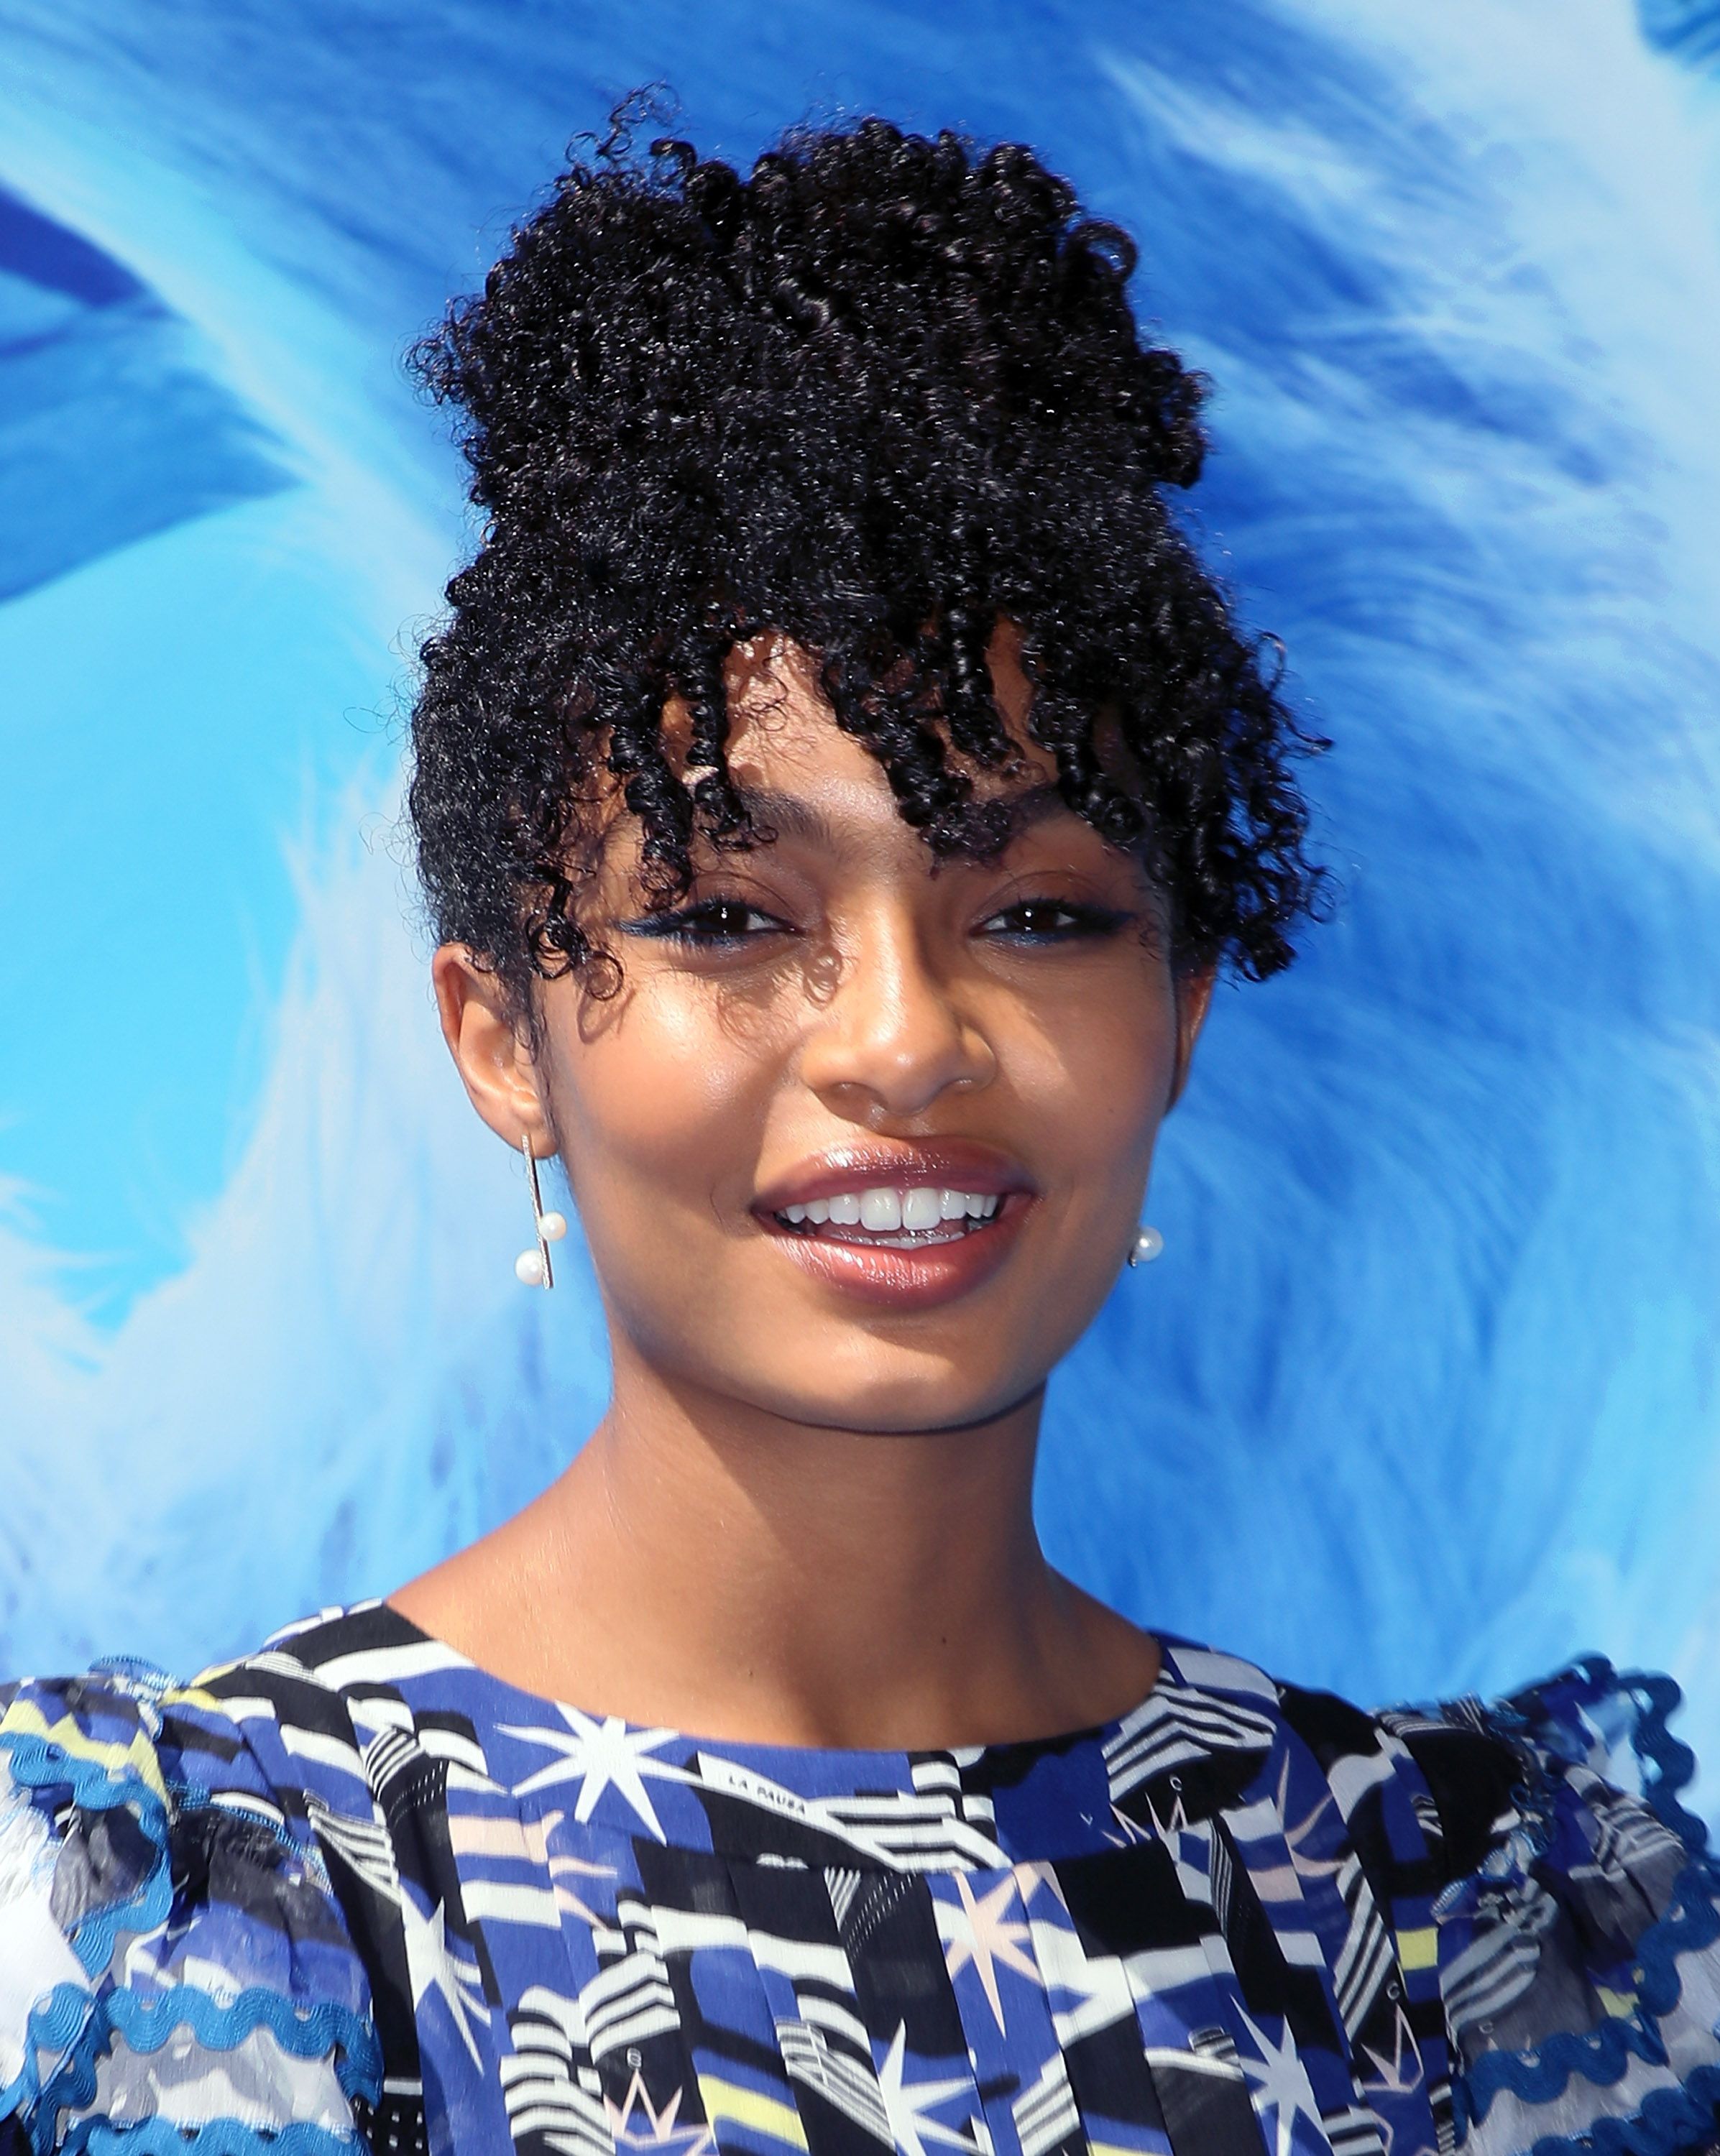 Top 25 Short Curly Hairstyles for Black Women